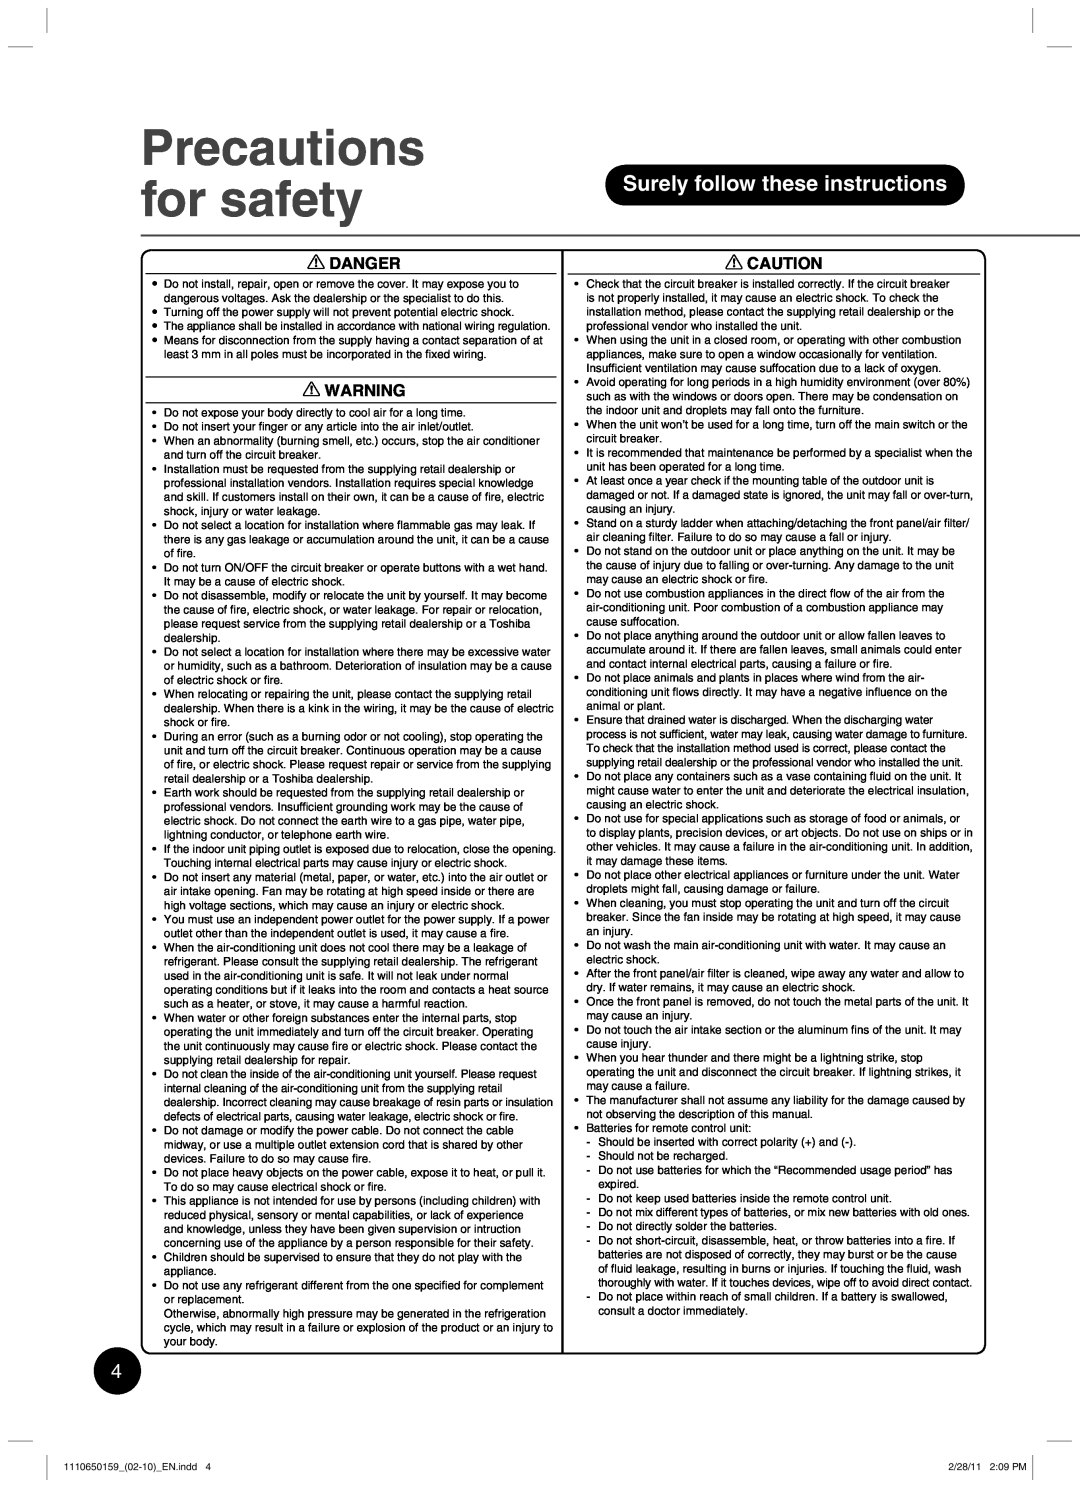 Toshiba RAS-10JKCVP owner manual Precautions, for safety, Surely follow these instructions, Danger 